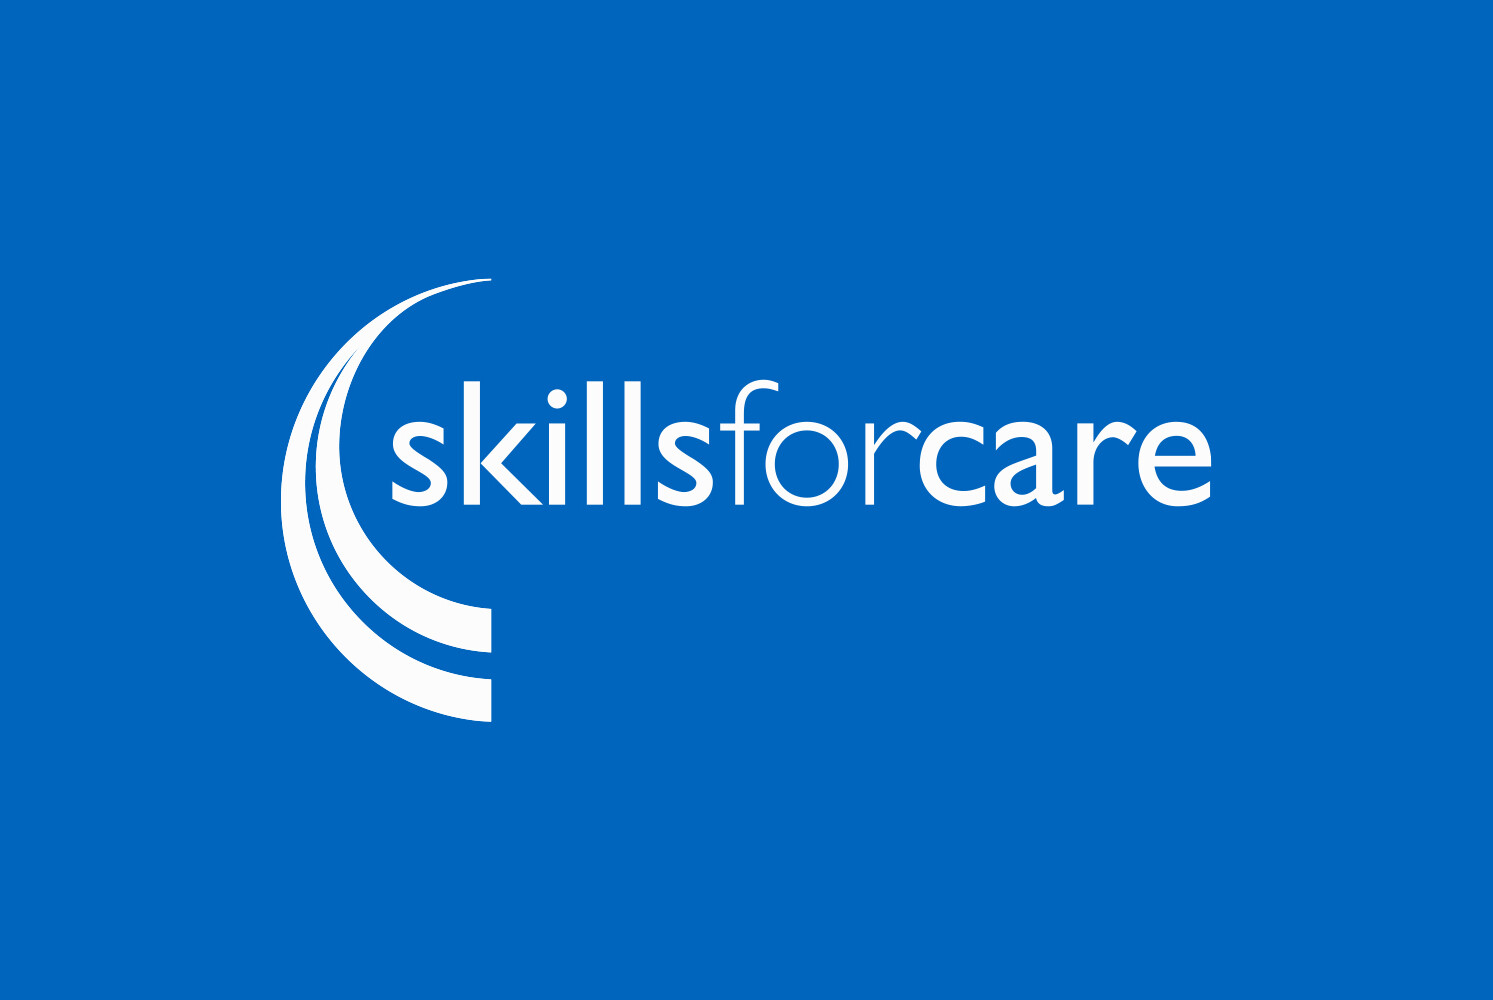 Skills For Care Logo on a blue background